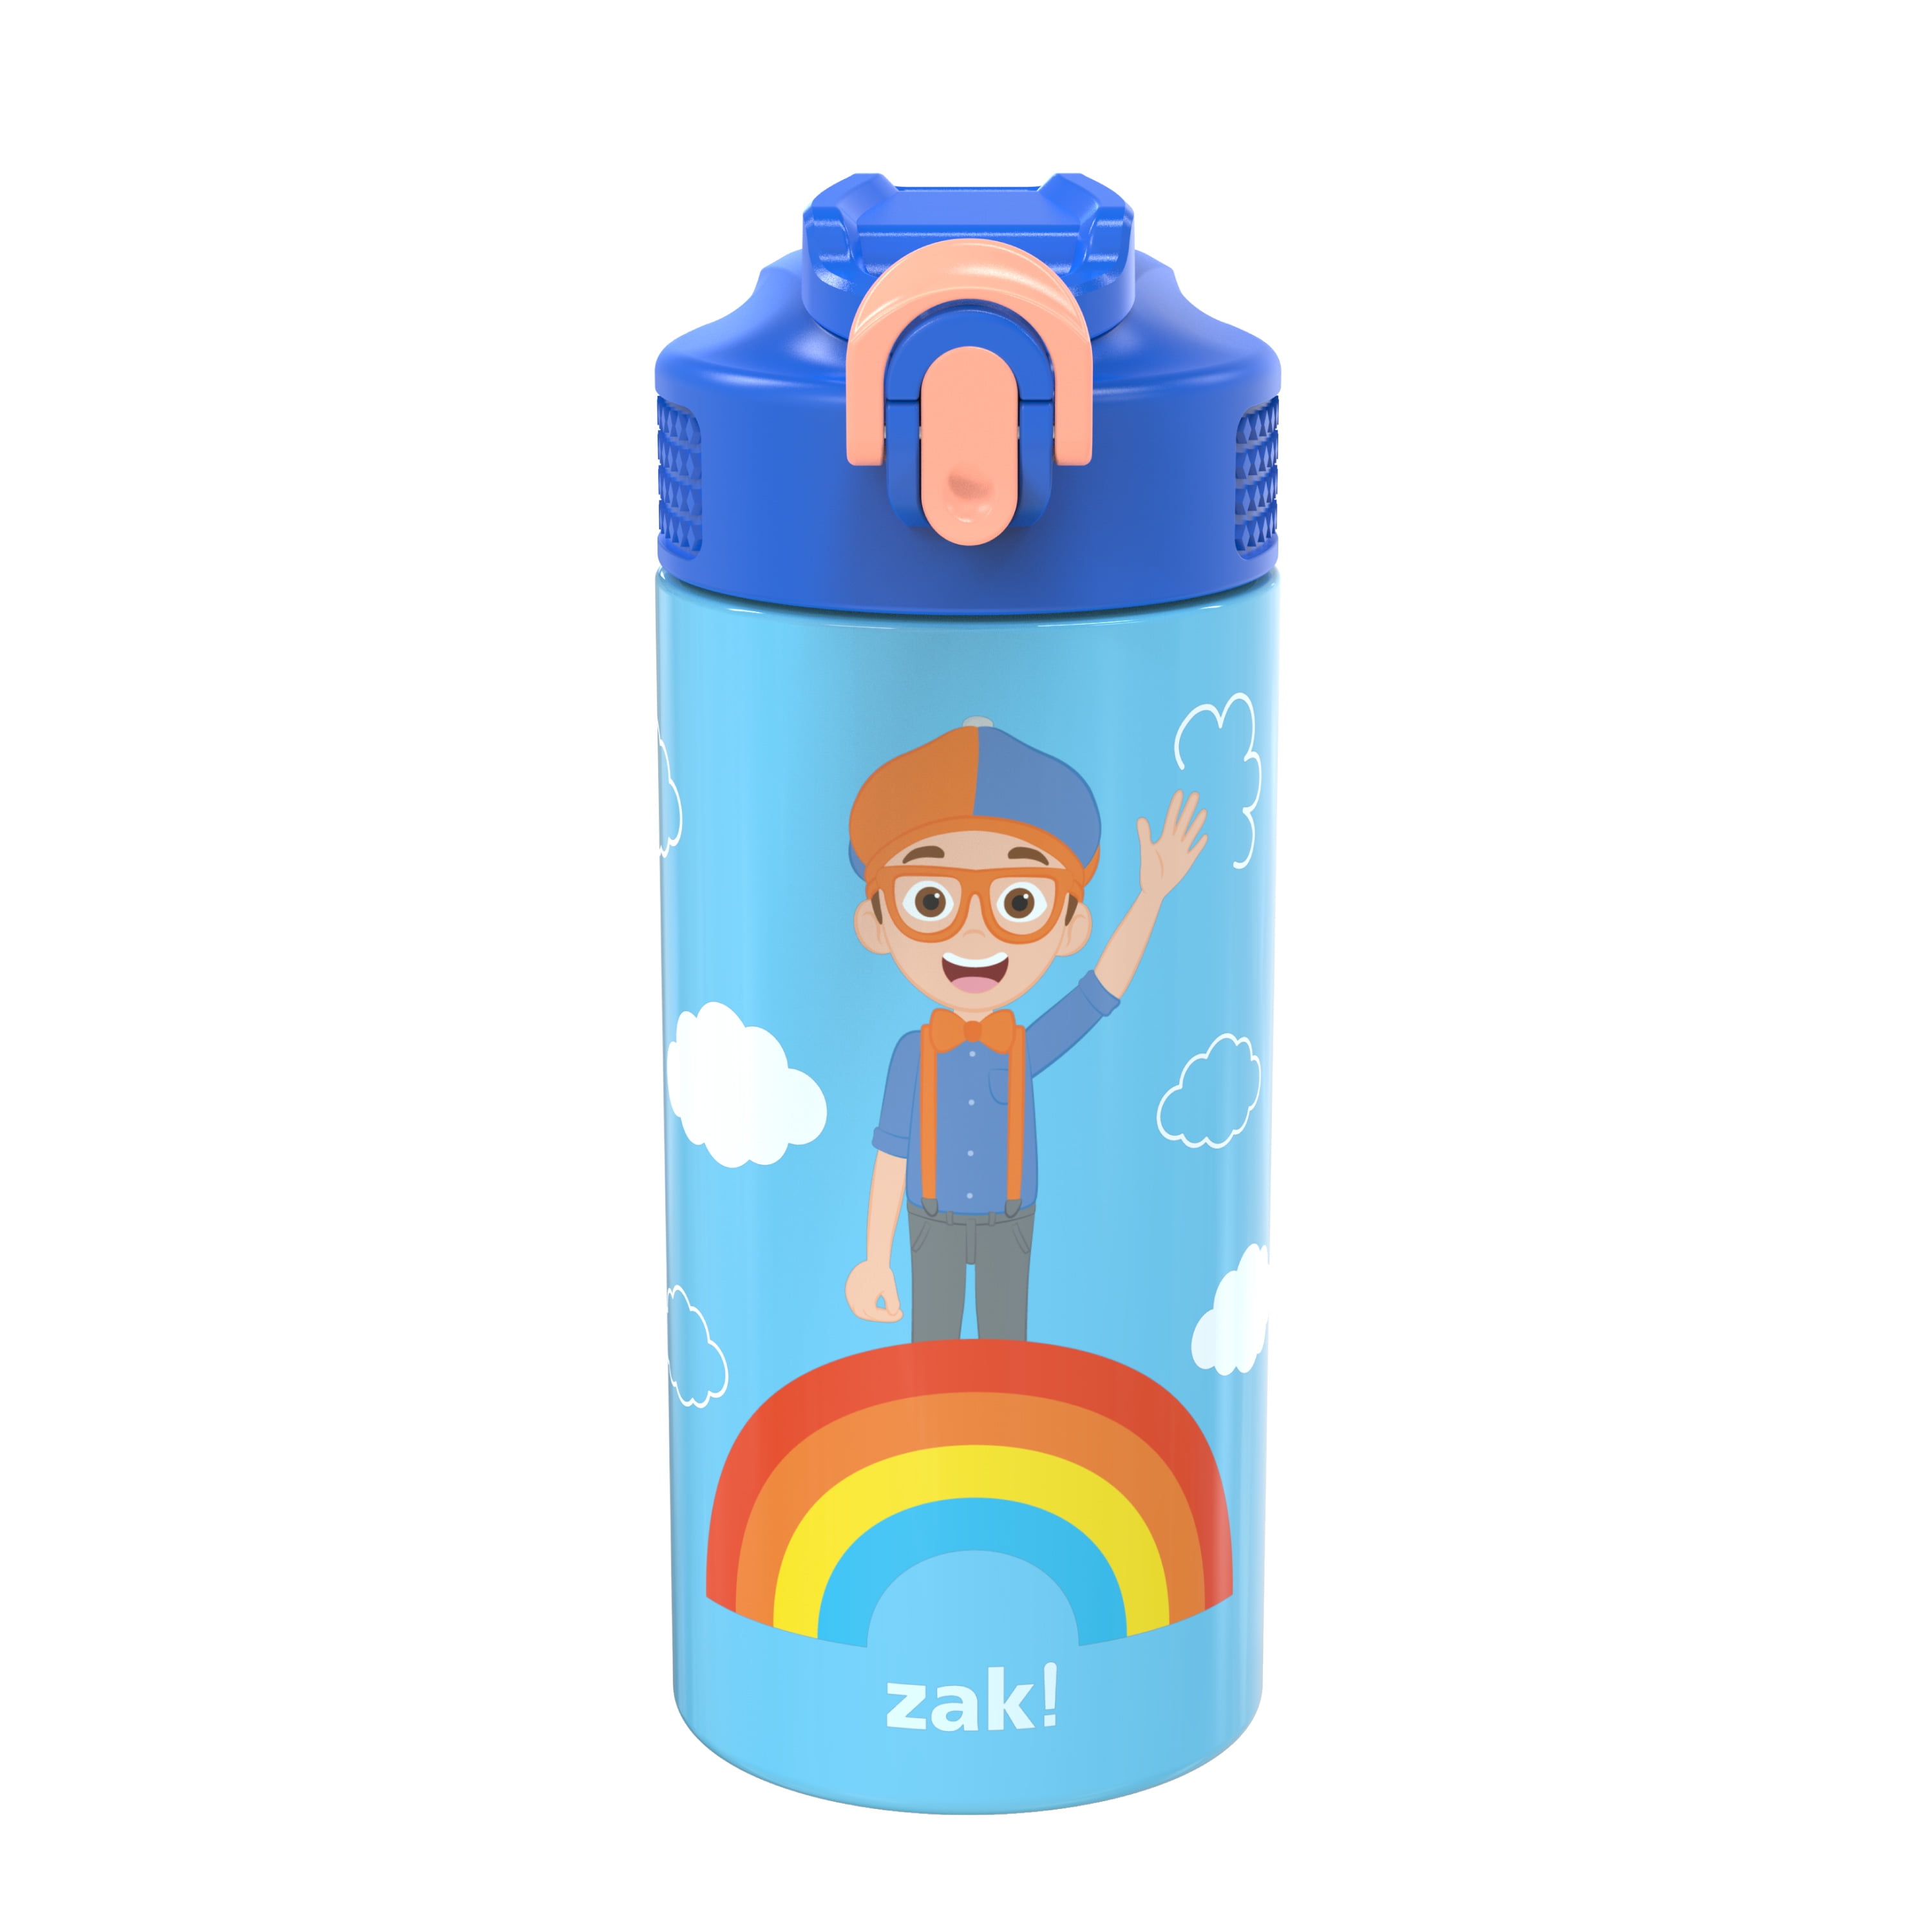 Zak Designs Kids Durable Plastic Spout Cover and Built-in Carrying Loop,  Leak-Proof Water Desig-Blippi 2pk - Drinkware, Facebook Marketplace